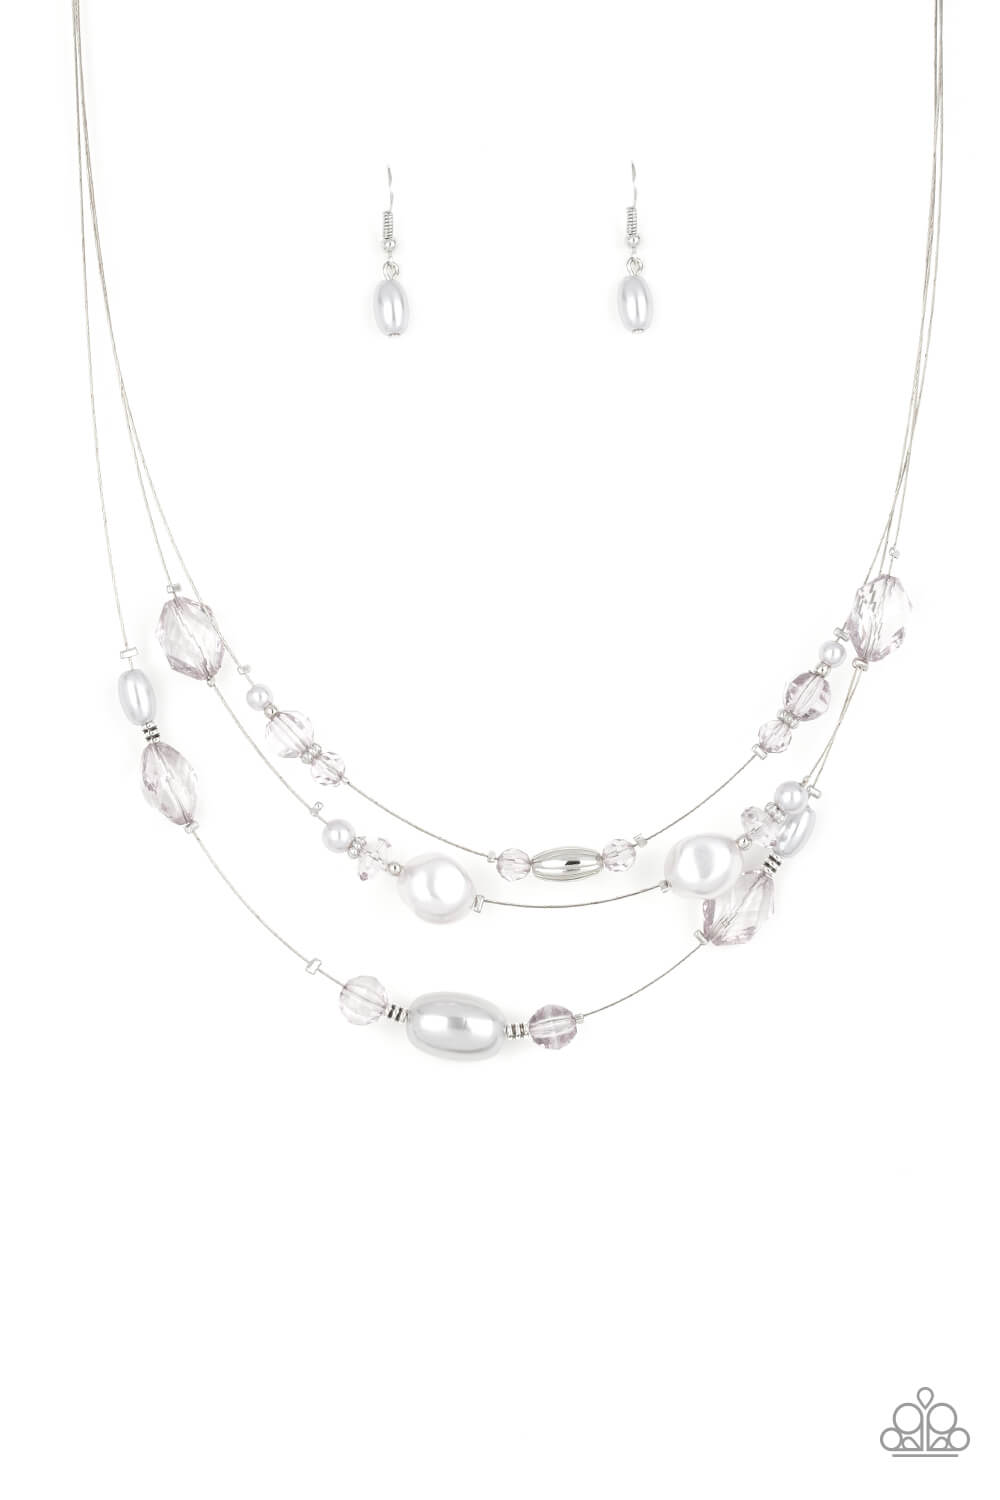 Pacific Pageantry - Silver Necklace Set - Princess Glam Shop